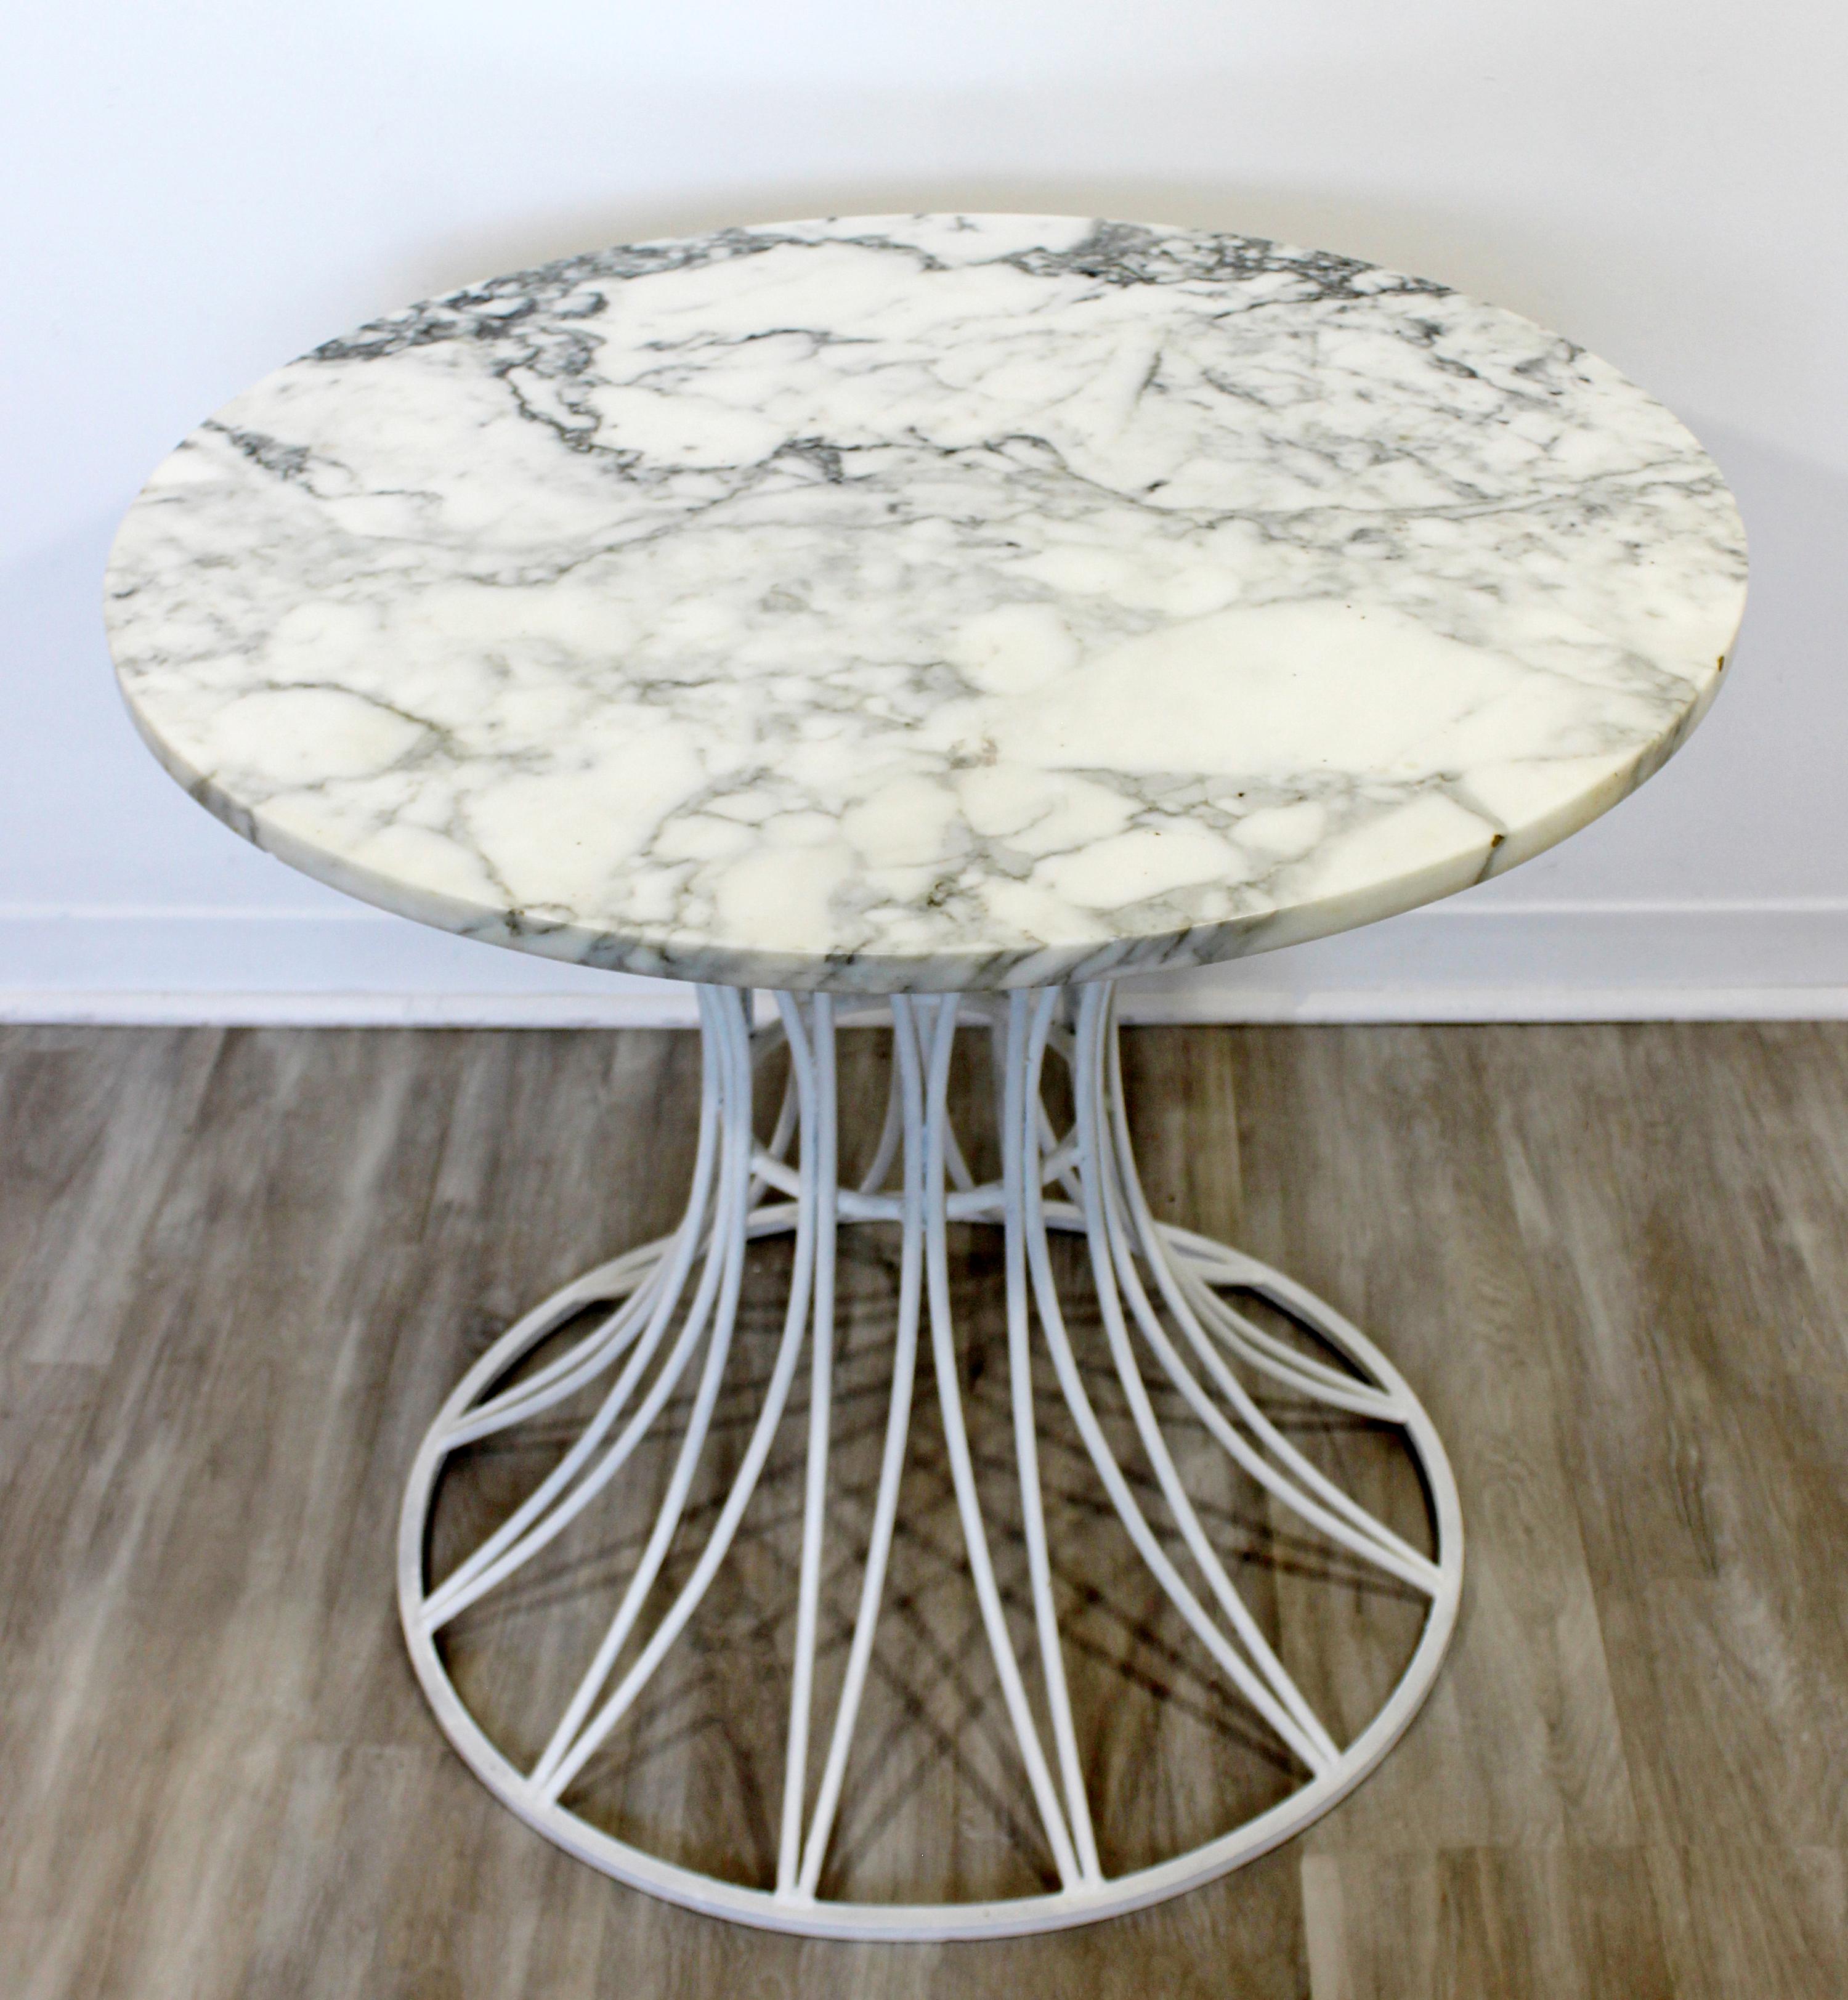 For your consideration is a gorgeous, outdoor patio table, with a marble top, by Russell Woodard, circa 1960s. In very good vintage condition. The dimensions are 32